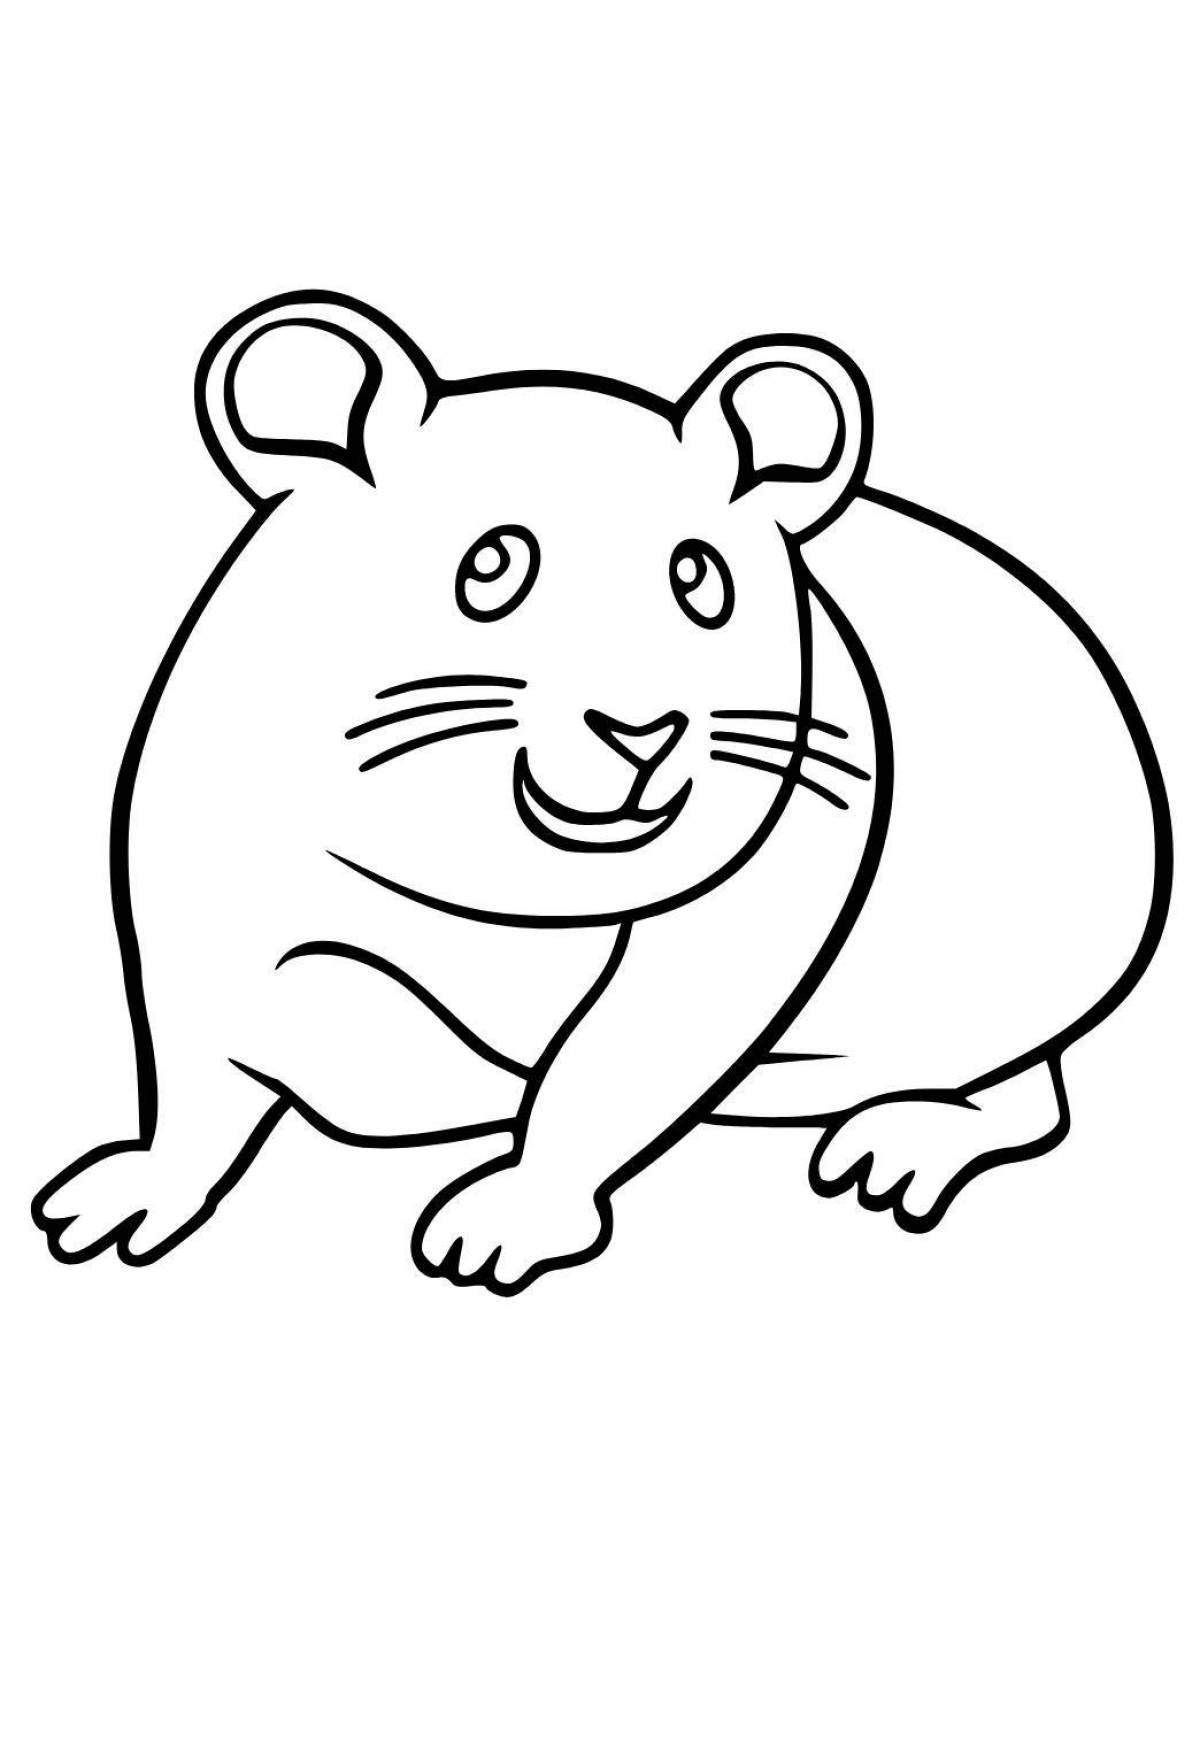 Coloring page plump hamster in a cage